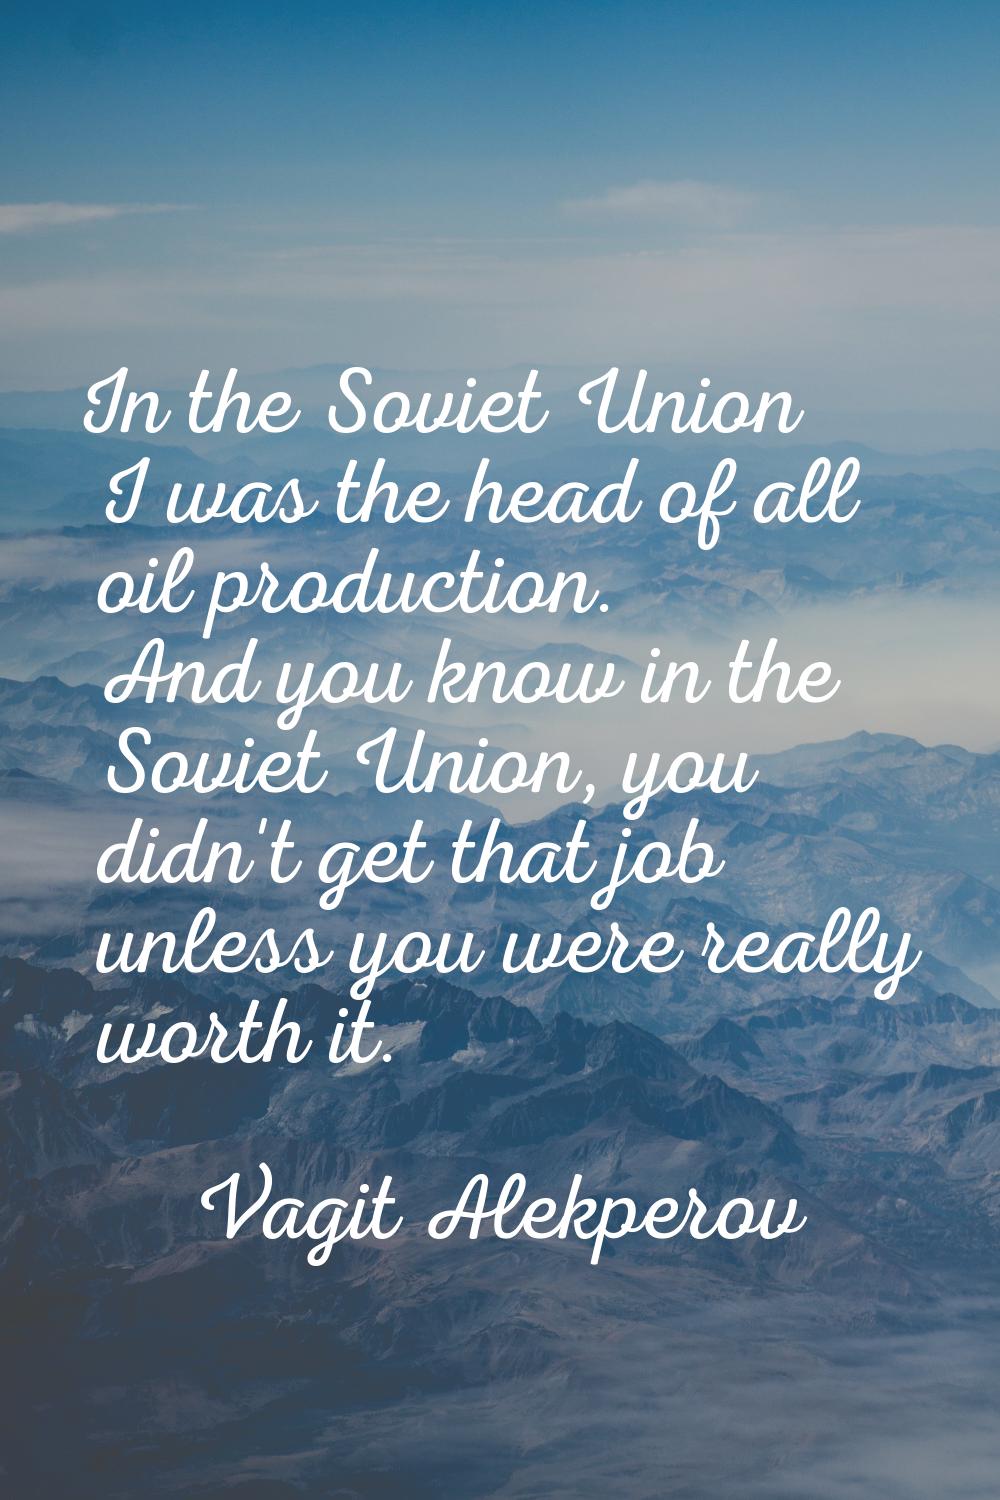 In the Soviet Union I was the head of all oil production. And you know in the Soviet Union, you did